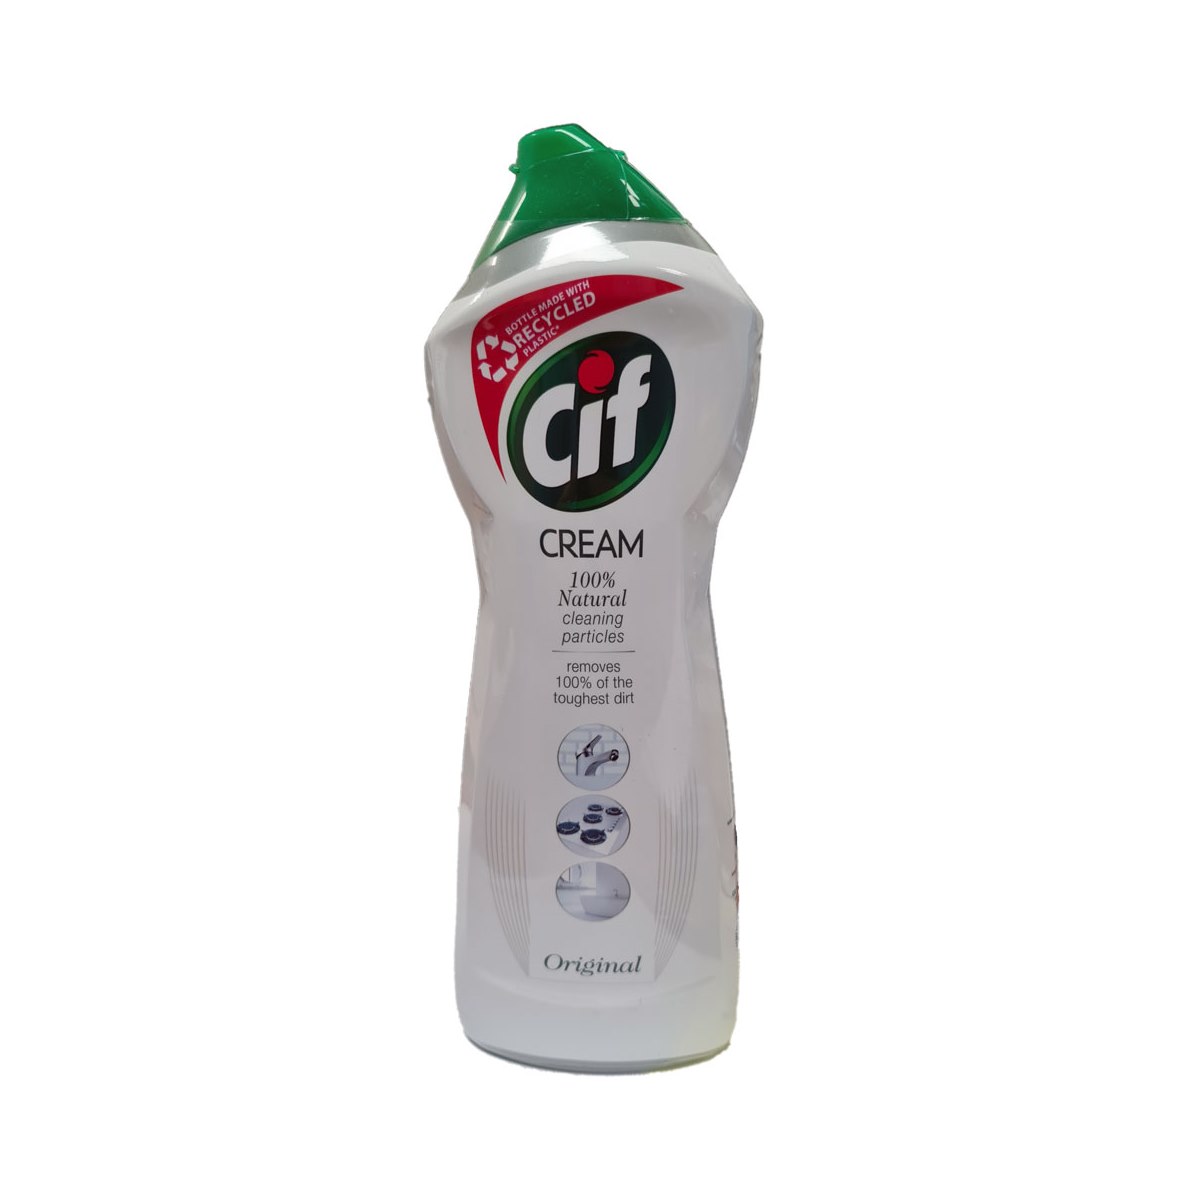 Cif Cream With Cleaning Particles Original